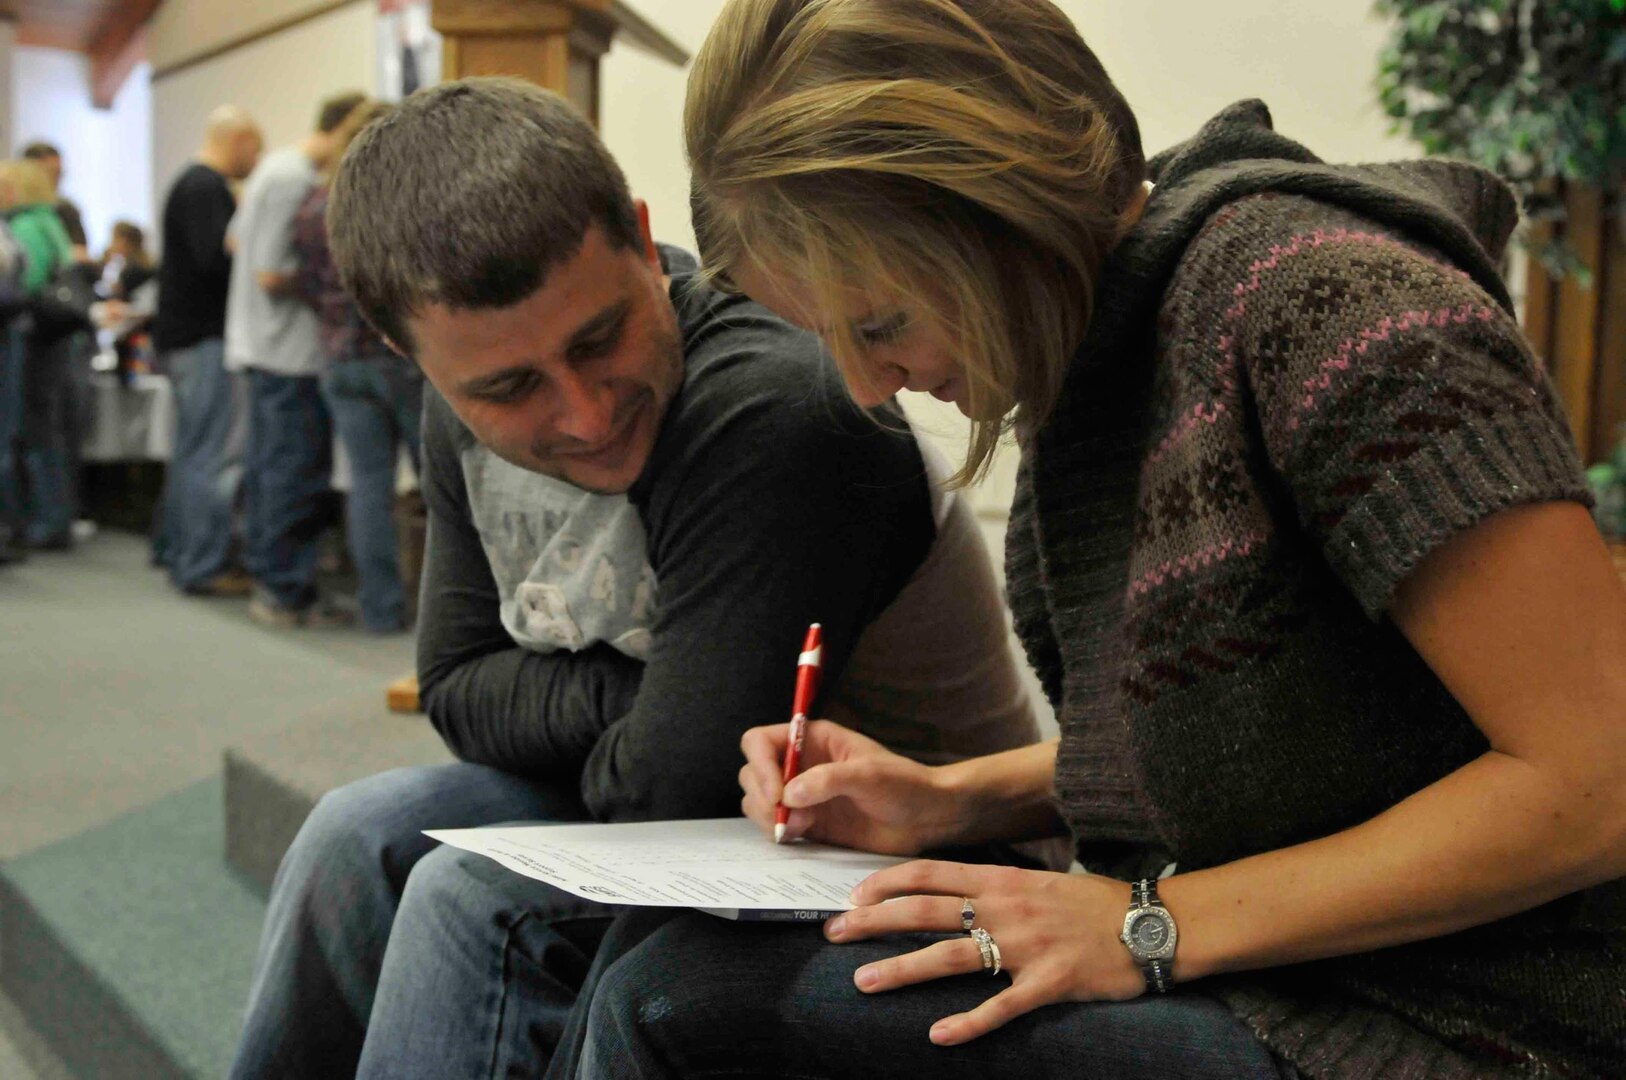 Army Sgt. Tosha Kunrath and her husband, Scott Kunrath, fill out a military survey after attending the "Laugh Your Way to a Better Marriage" conference.